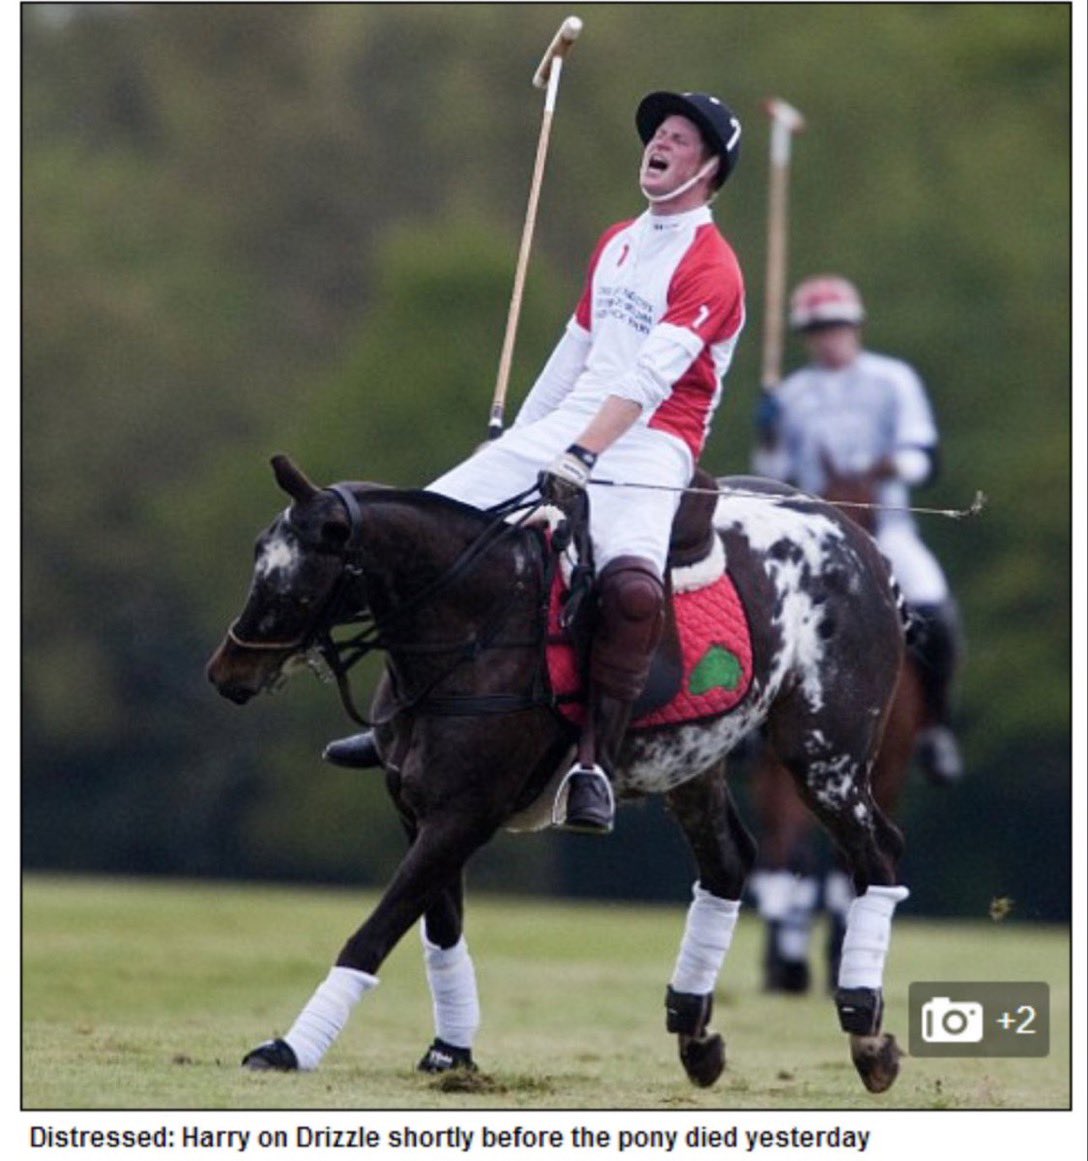 @TandCmag #PrinceHarry killed a PREGNANT polo pony He was TOLD not to ride her but he did it anyway. She had a heart attack and died after he finally got off her.